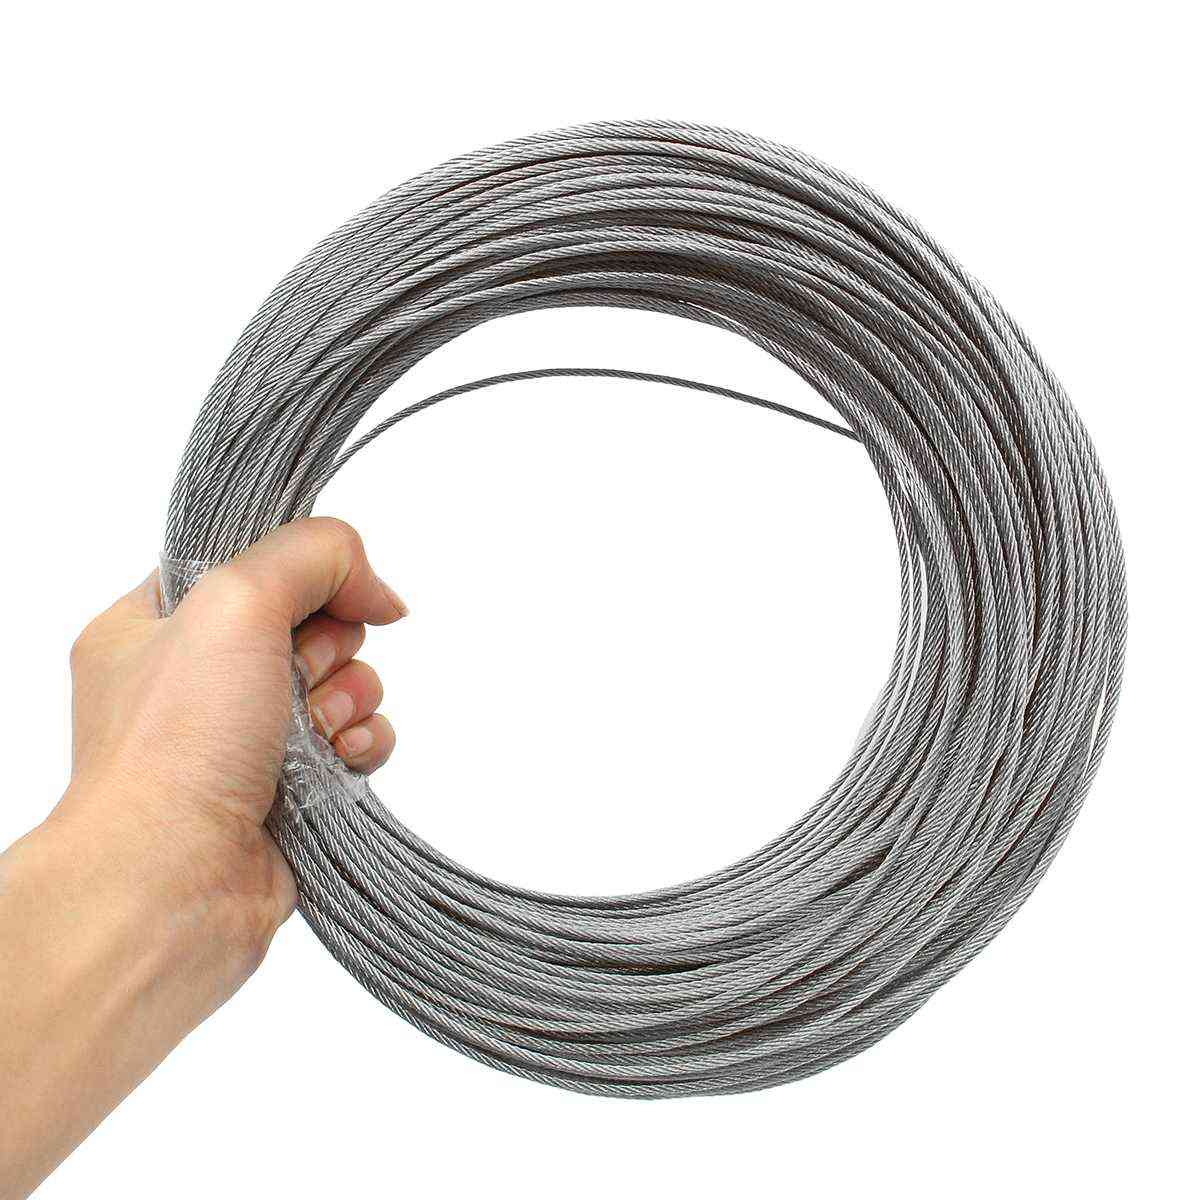 Stainless Steel Wire Rope, Fishing Lifting Cable Line